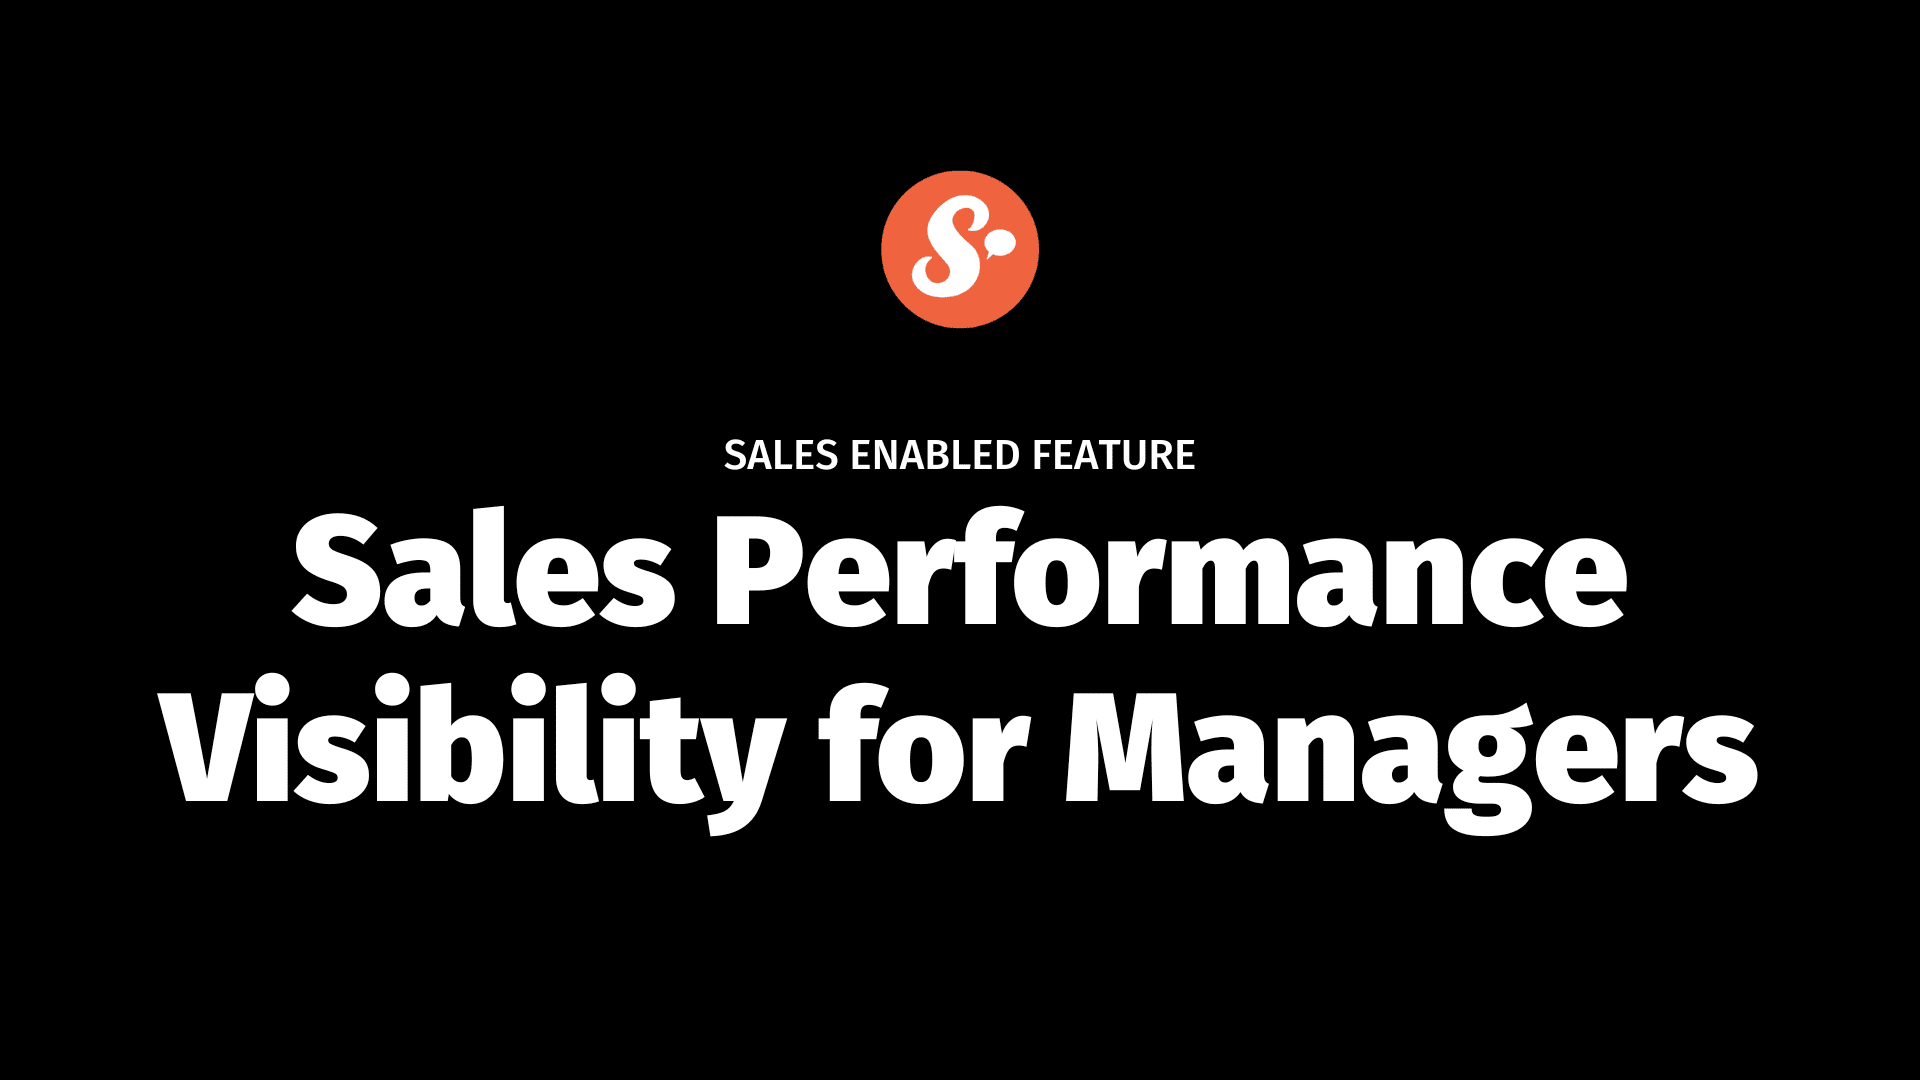 SALES ENABLED FEATURE Sales performance visibility for managers